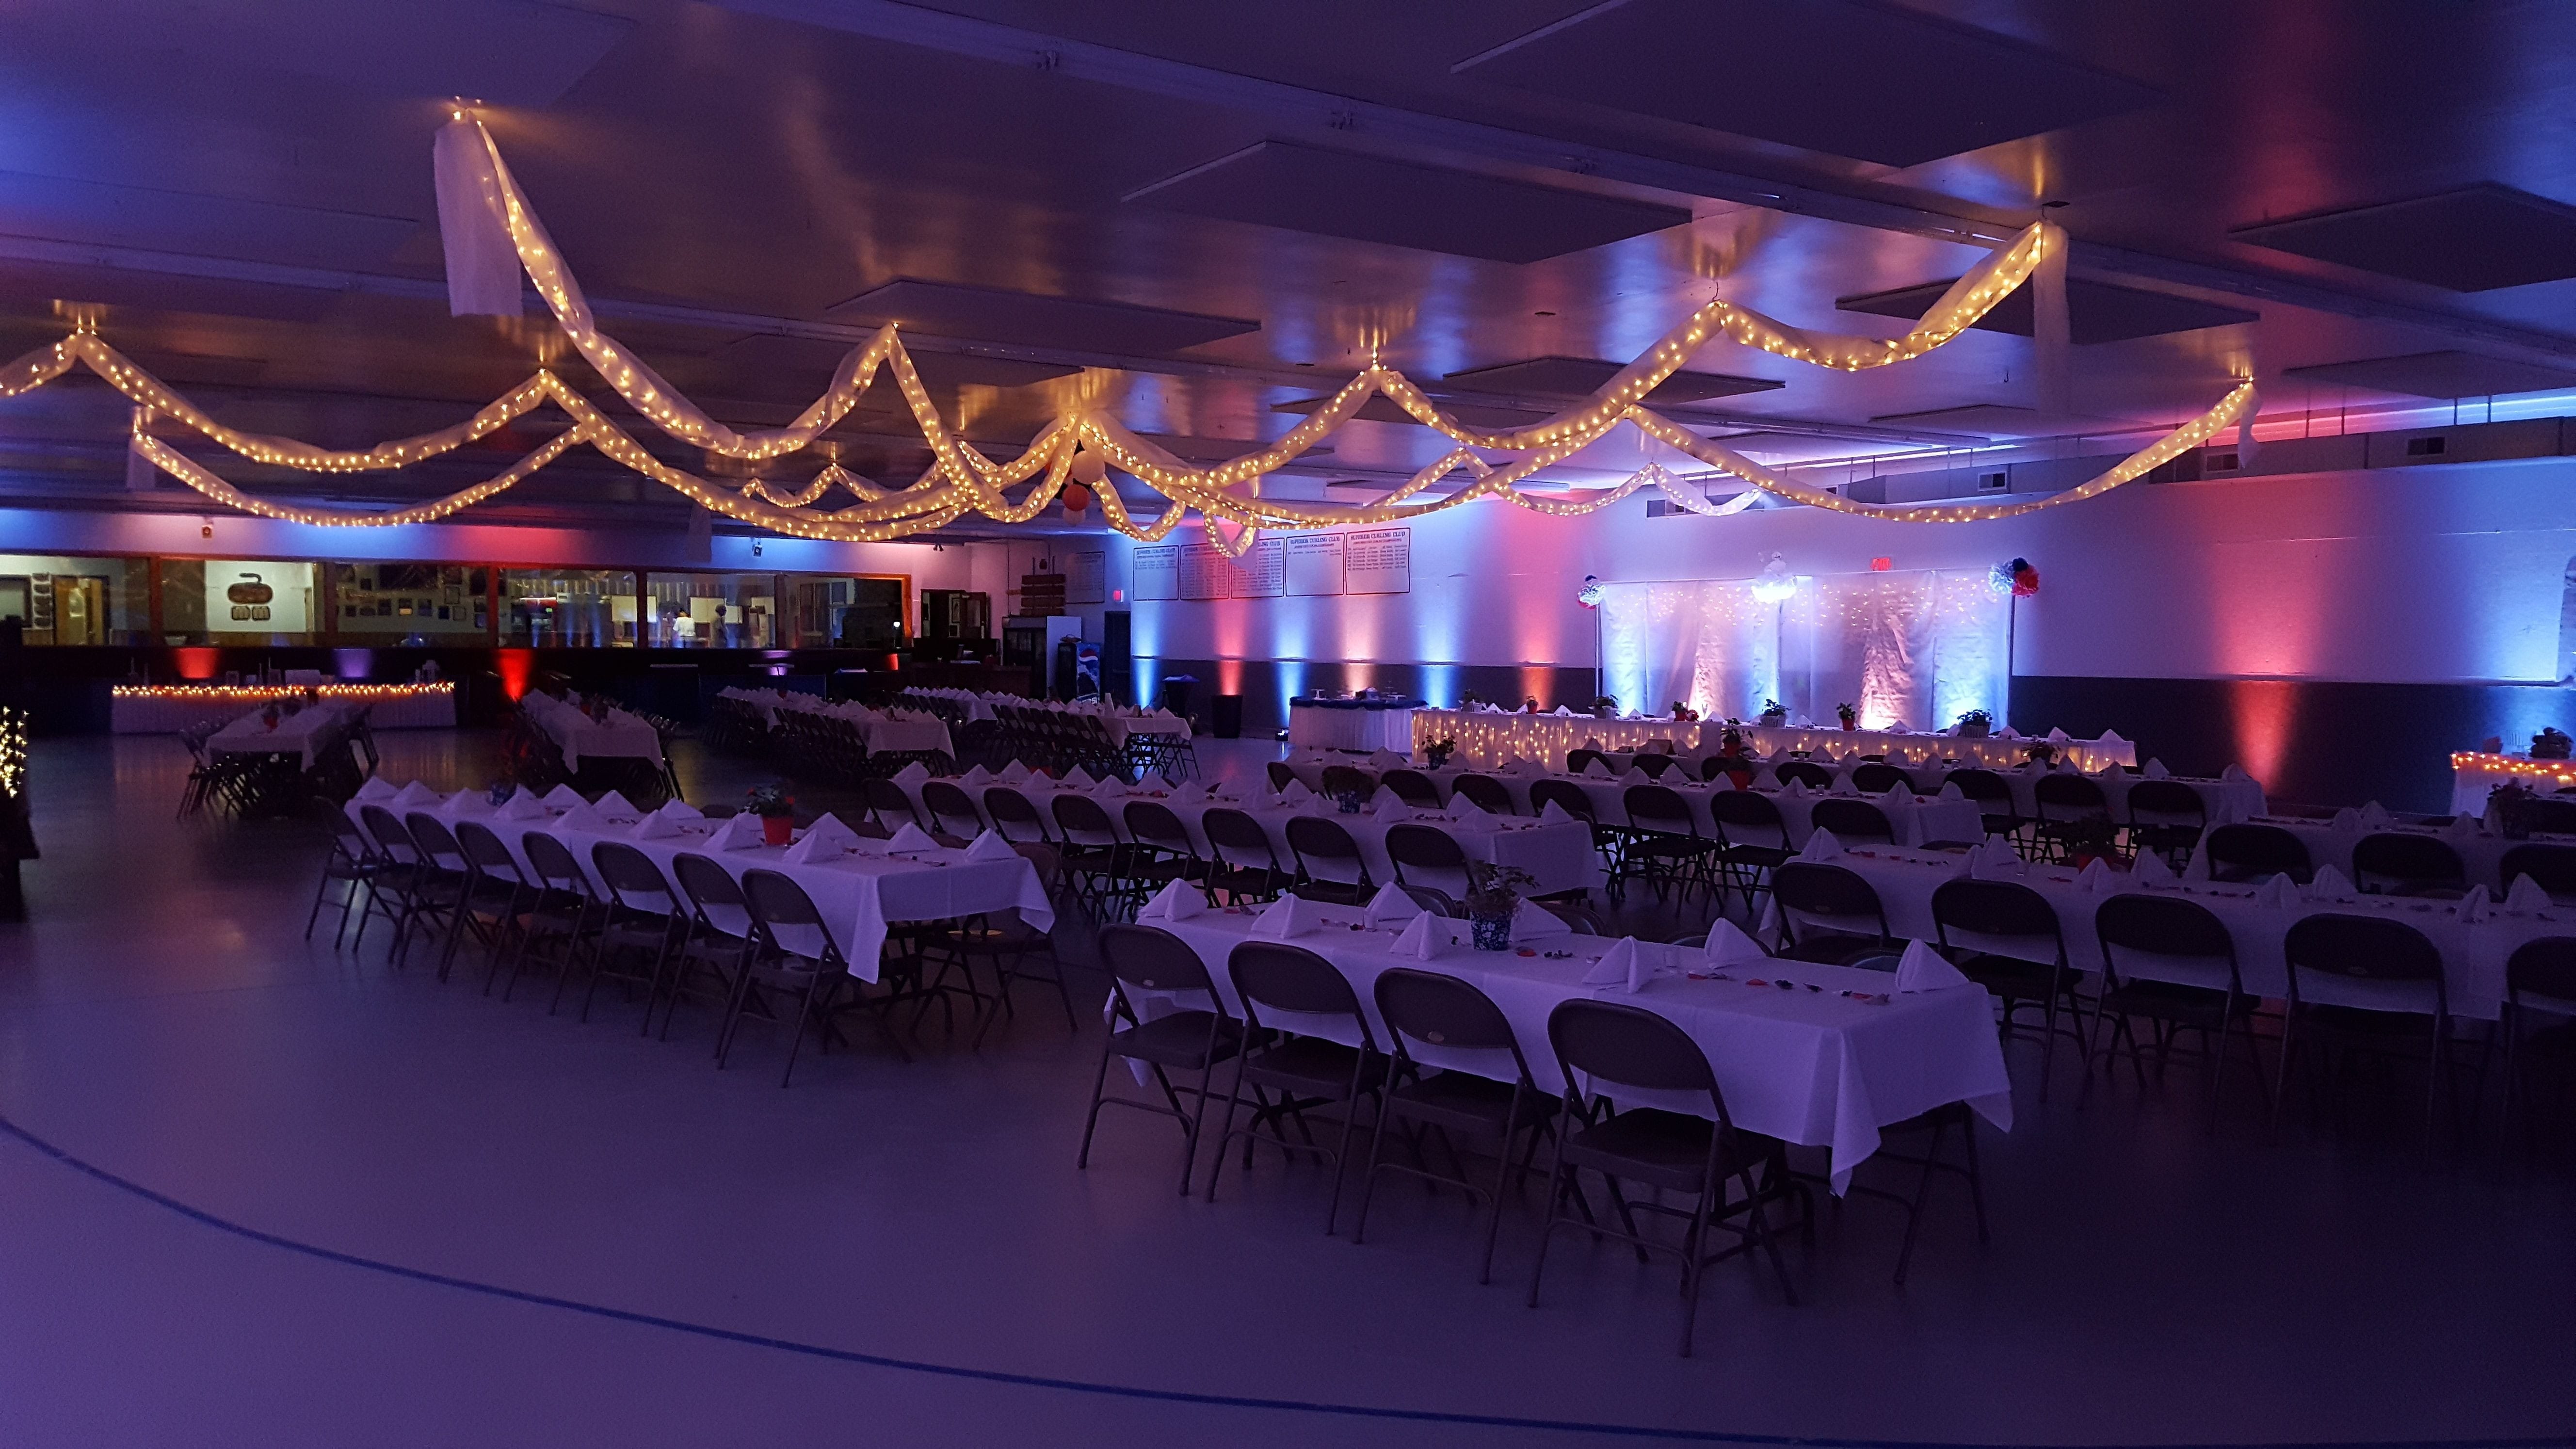 Superior Curling Club.
Up lighting in pink, coral and a lite blue for a wedding.